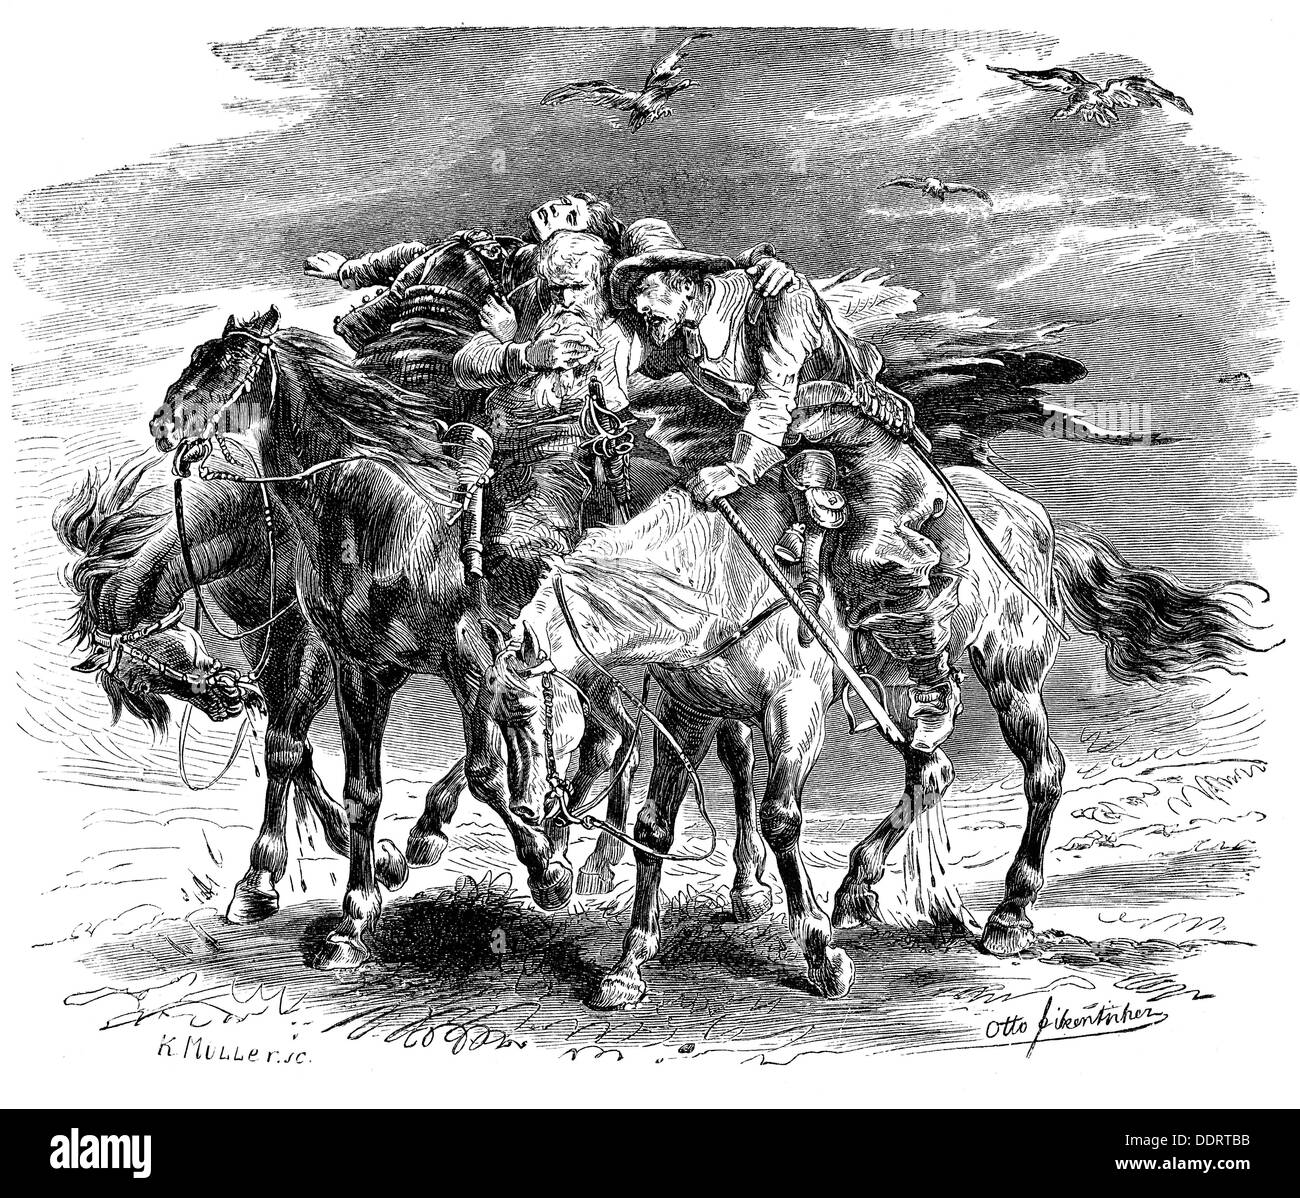 Geibel, Emanuel, 17.10.1815 - 6.4.1884, German author / writer, oevre, 'Die drei Reiter' (The Three Horsemen), after drawing by Otto Fikentscher (1862 - 1945), wood engraving by K.Müller, late 19th century, Stock Photo